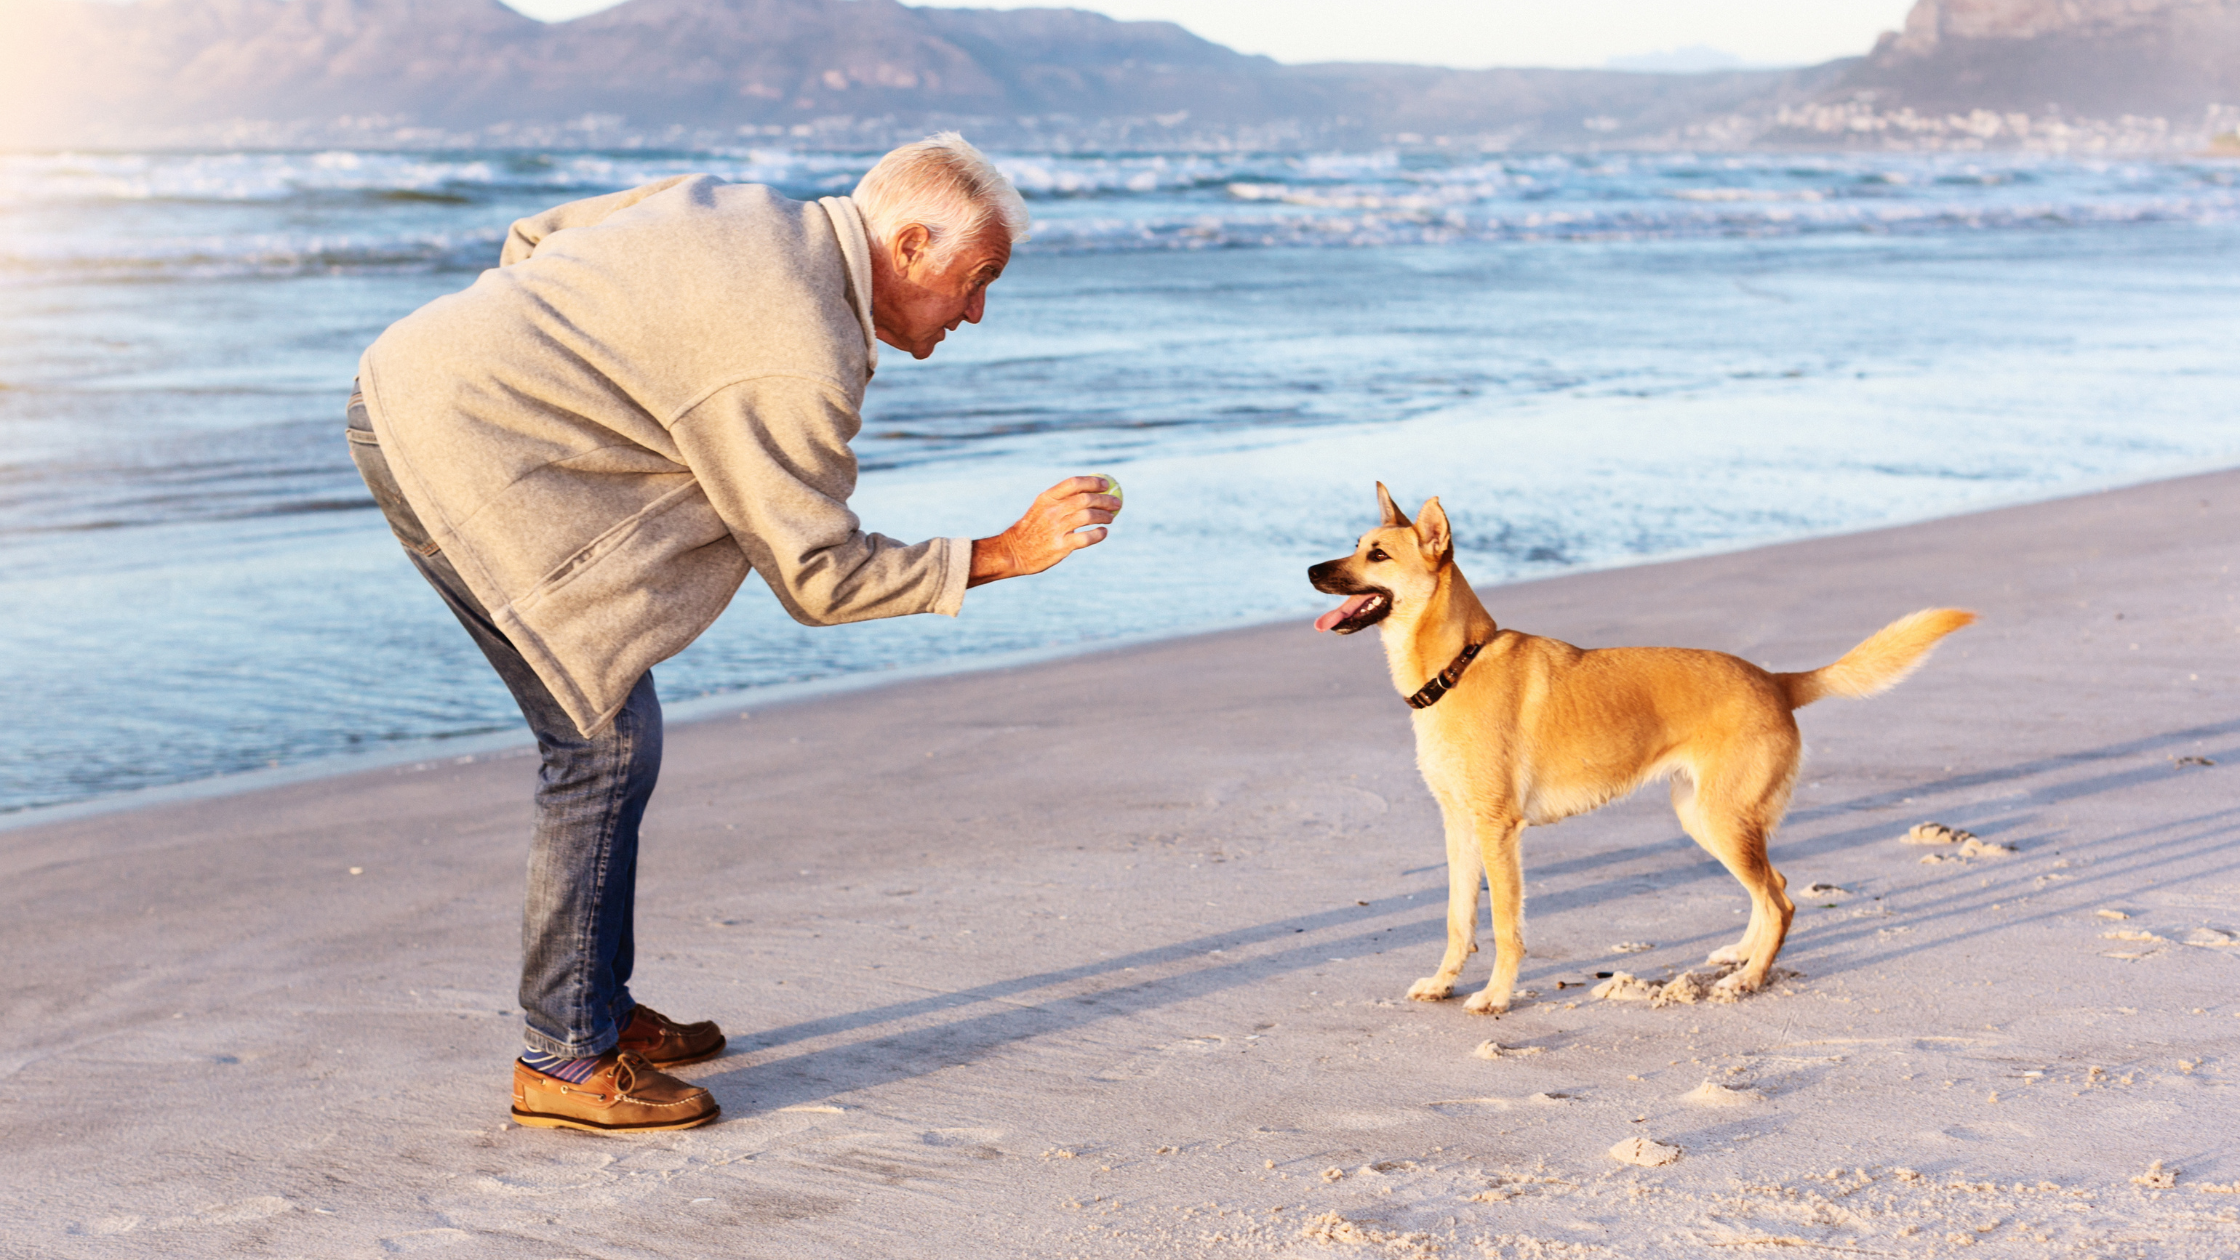 Senior man at the beach holds ball in front of dog just before throwing it